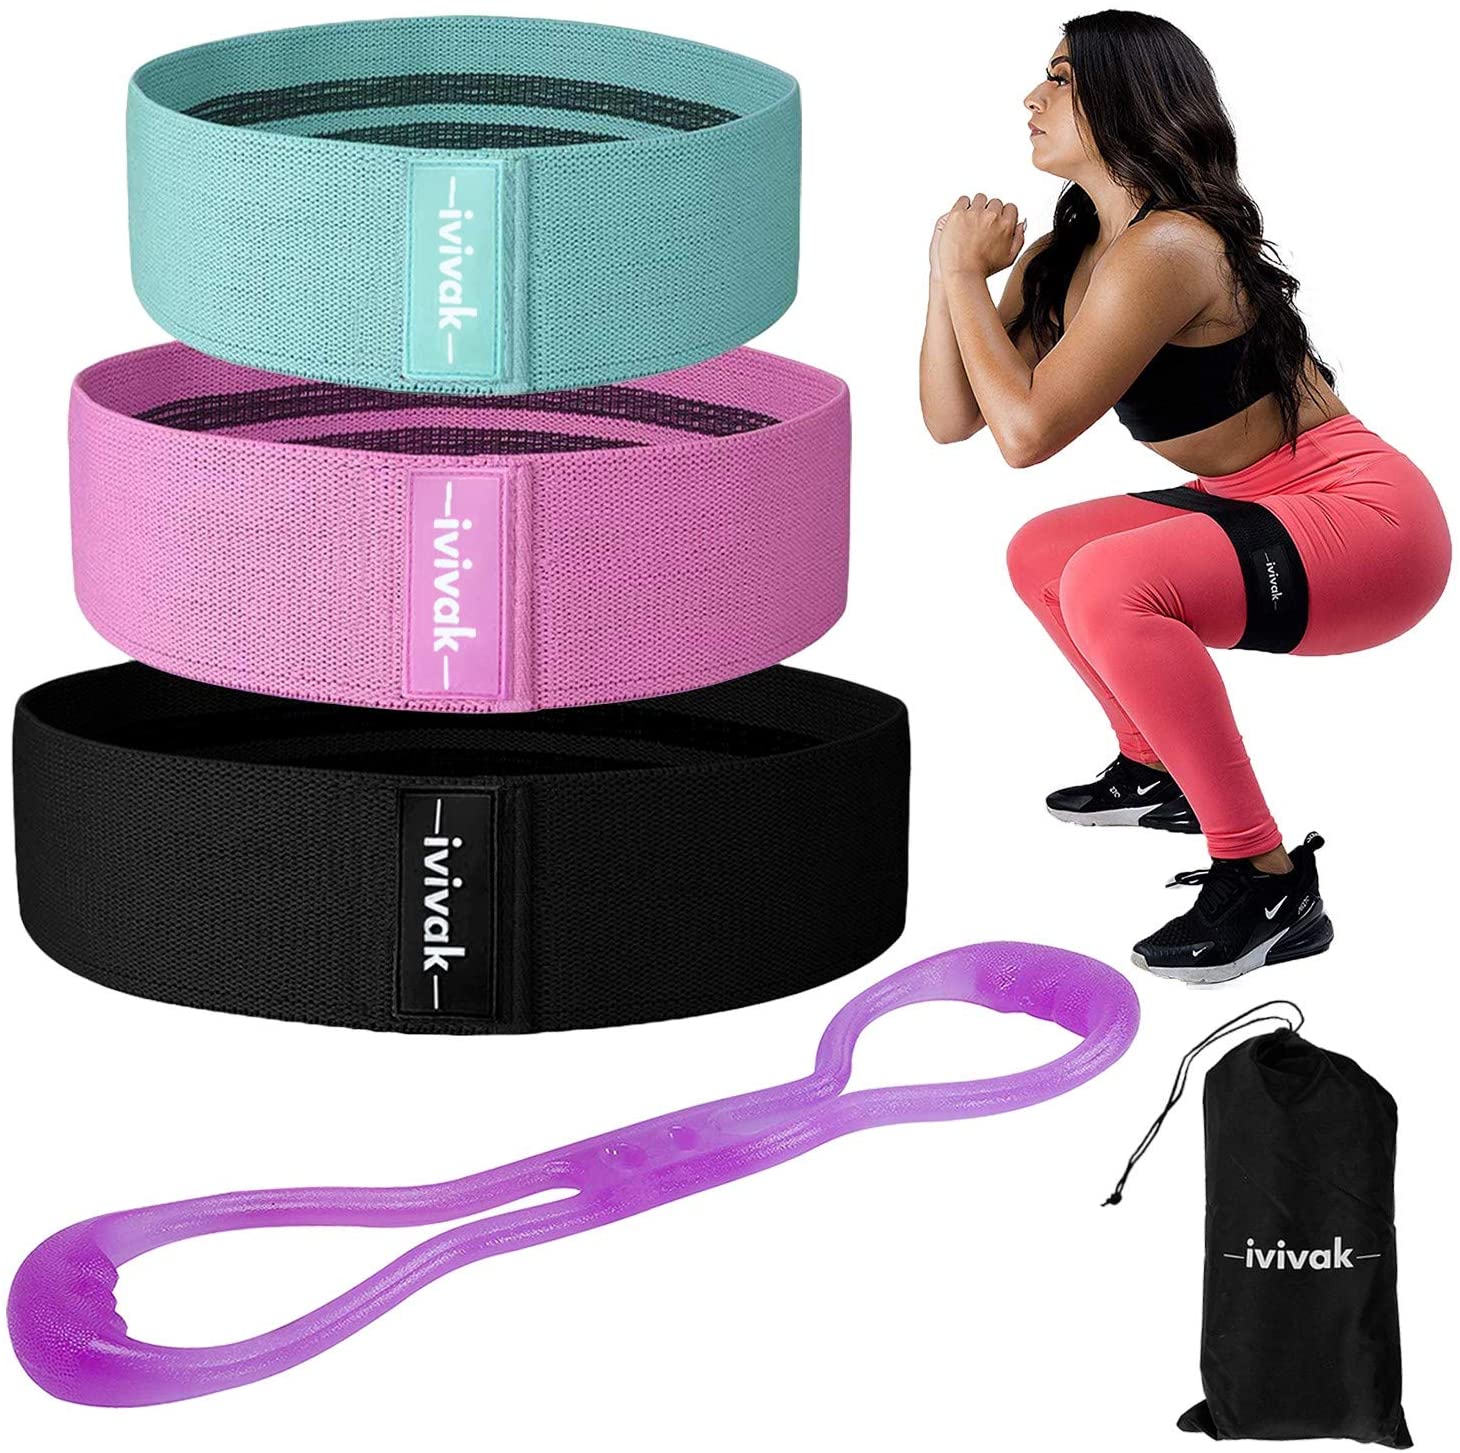 Amazon.com : Resistance Band with Booty Loop Bands, for ...